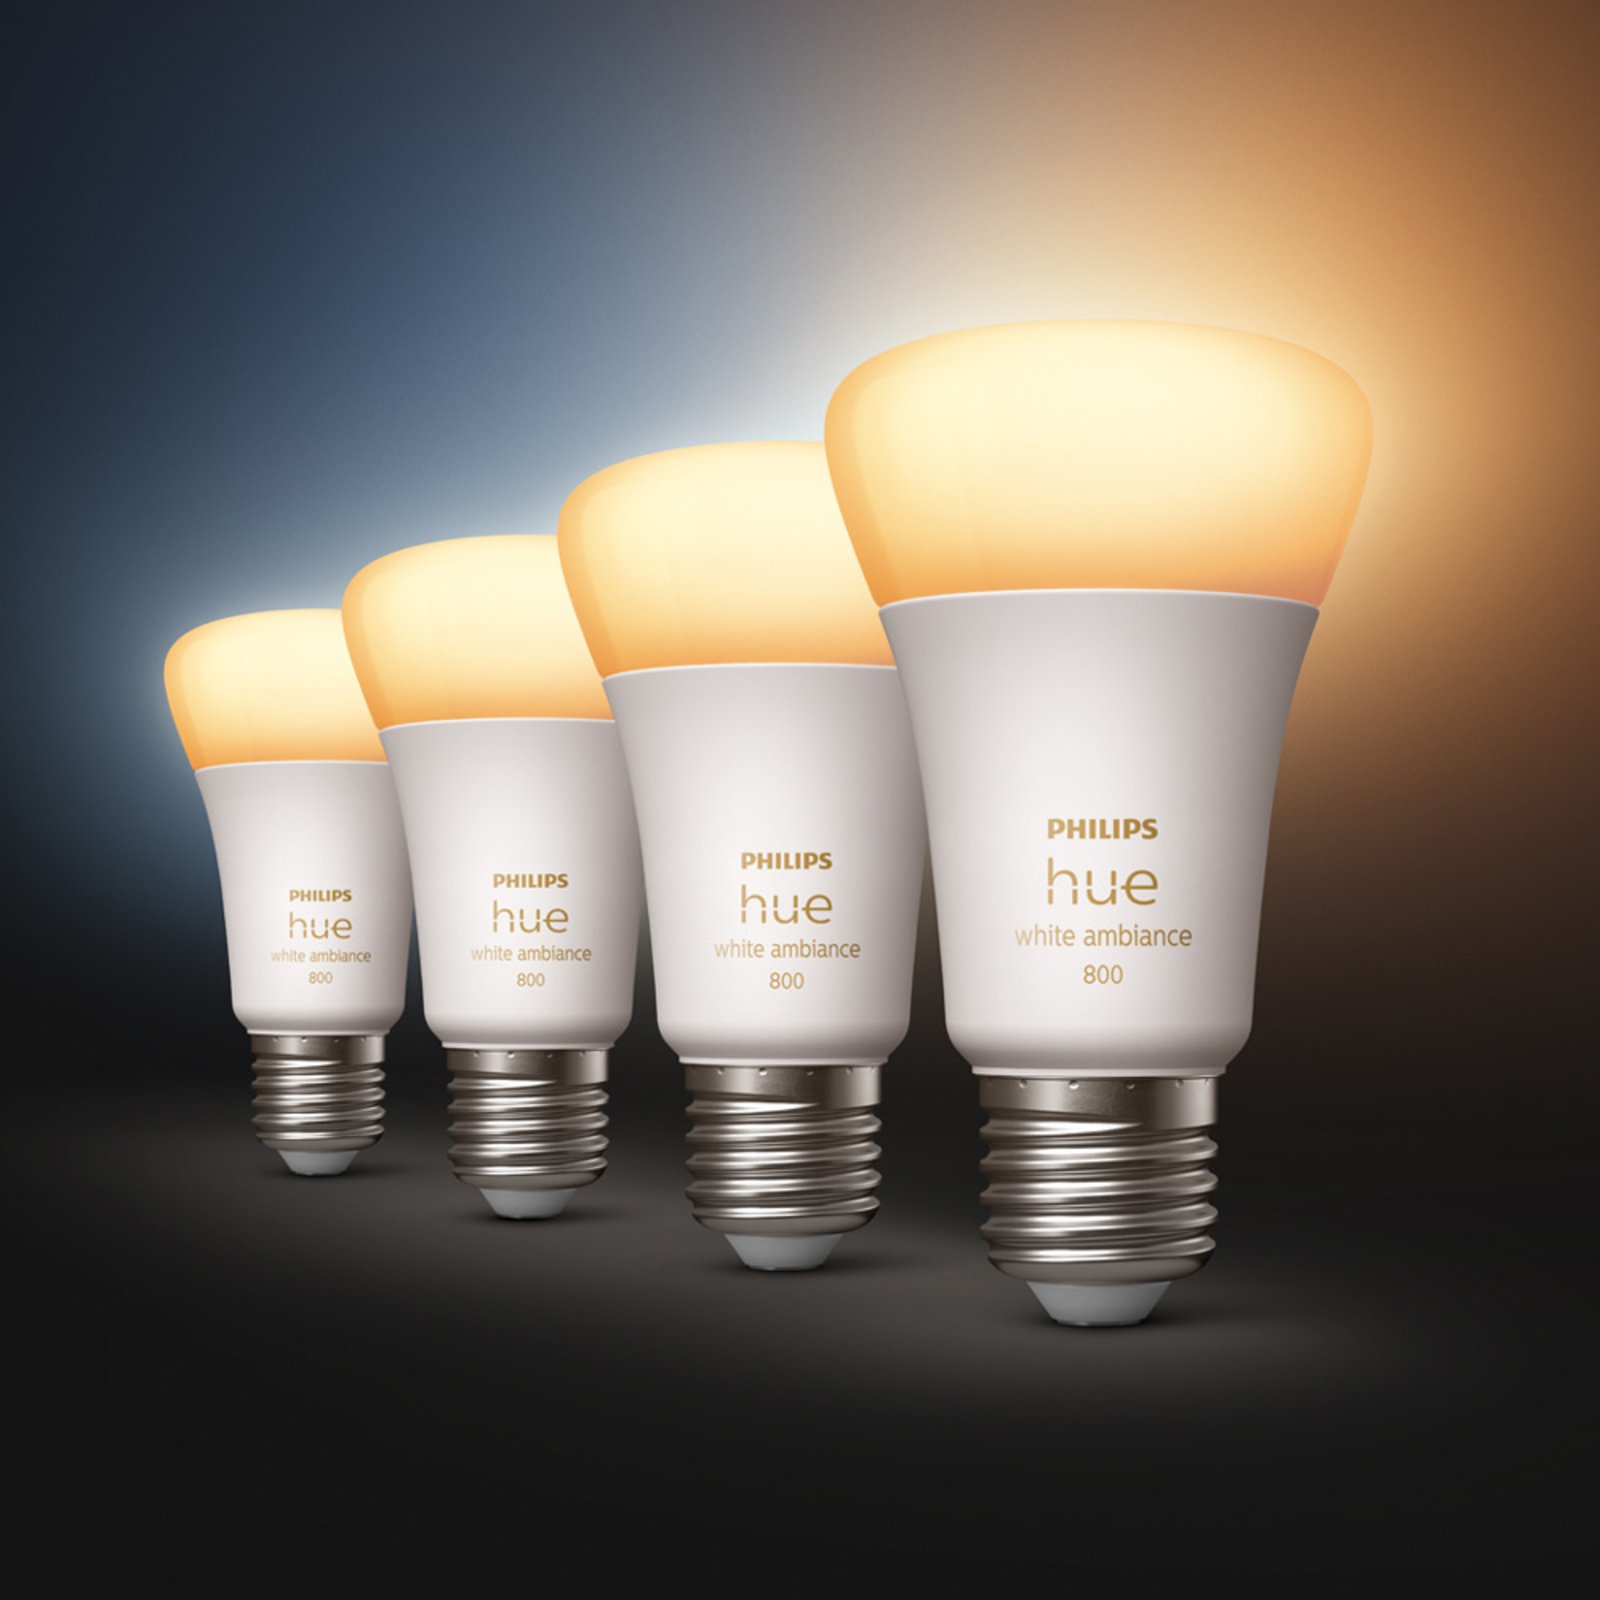 Philips Hue White Ambiance 6W 800lm E27 4-pakning